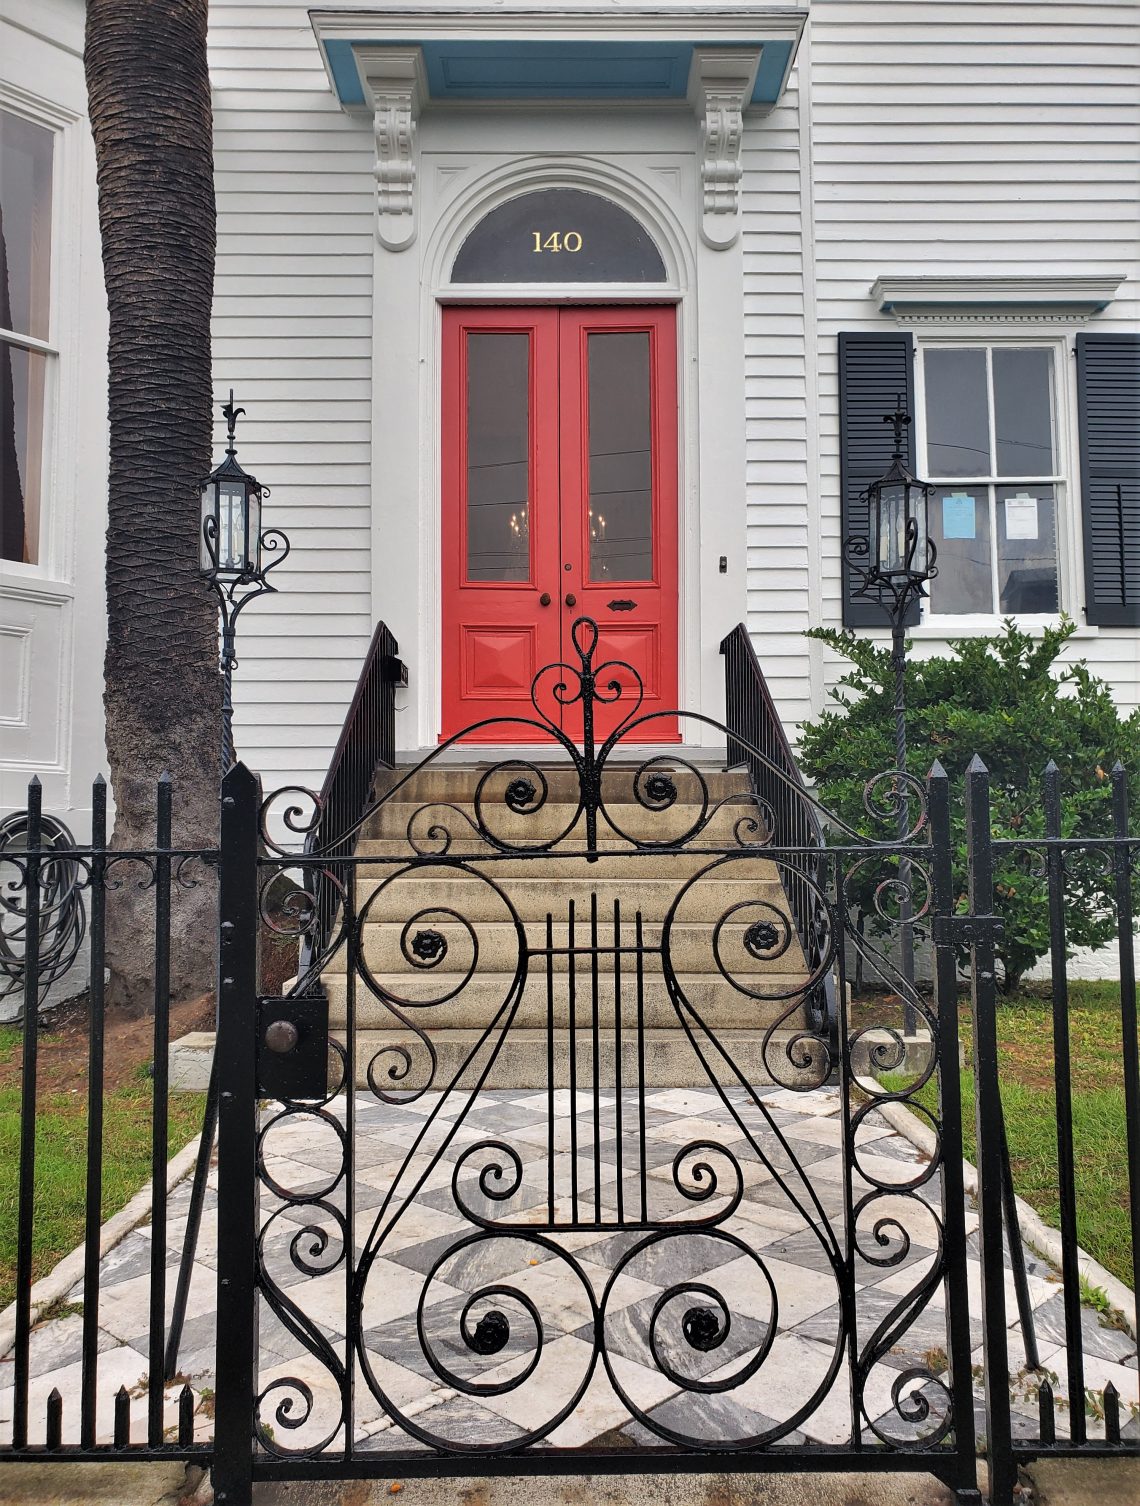 This beautiful gate, walk and door can be found in an impressive house on Broad Street. The house, built c. 1870, replaced an earlier one owned by the same man which burned down in the Great Fire of 1861 (which claimed over 575 other houses and more).